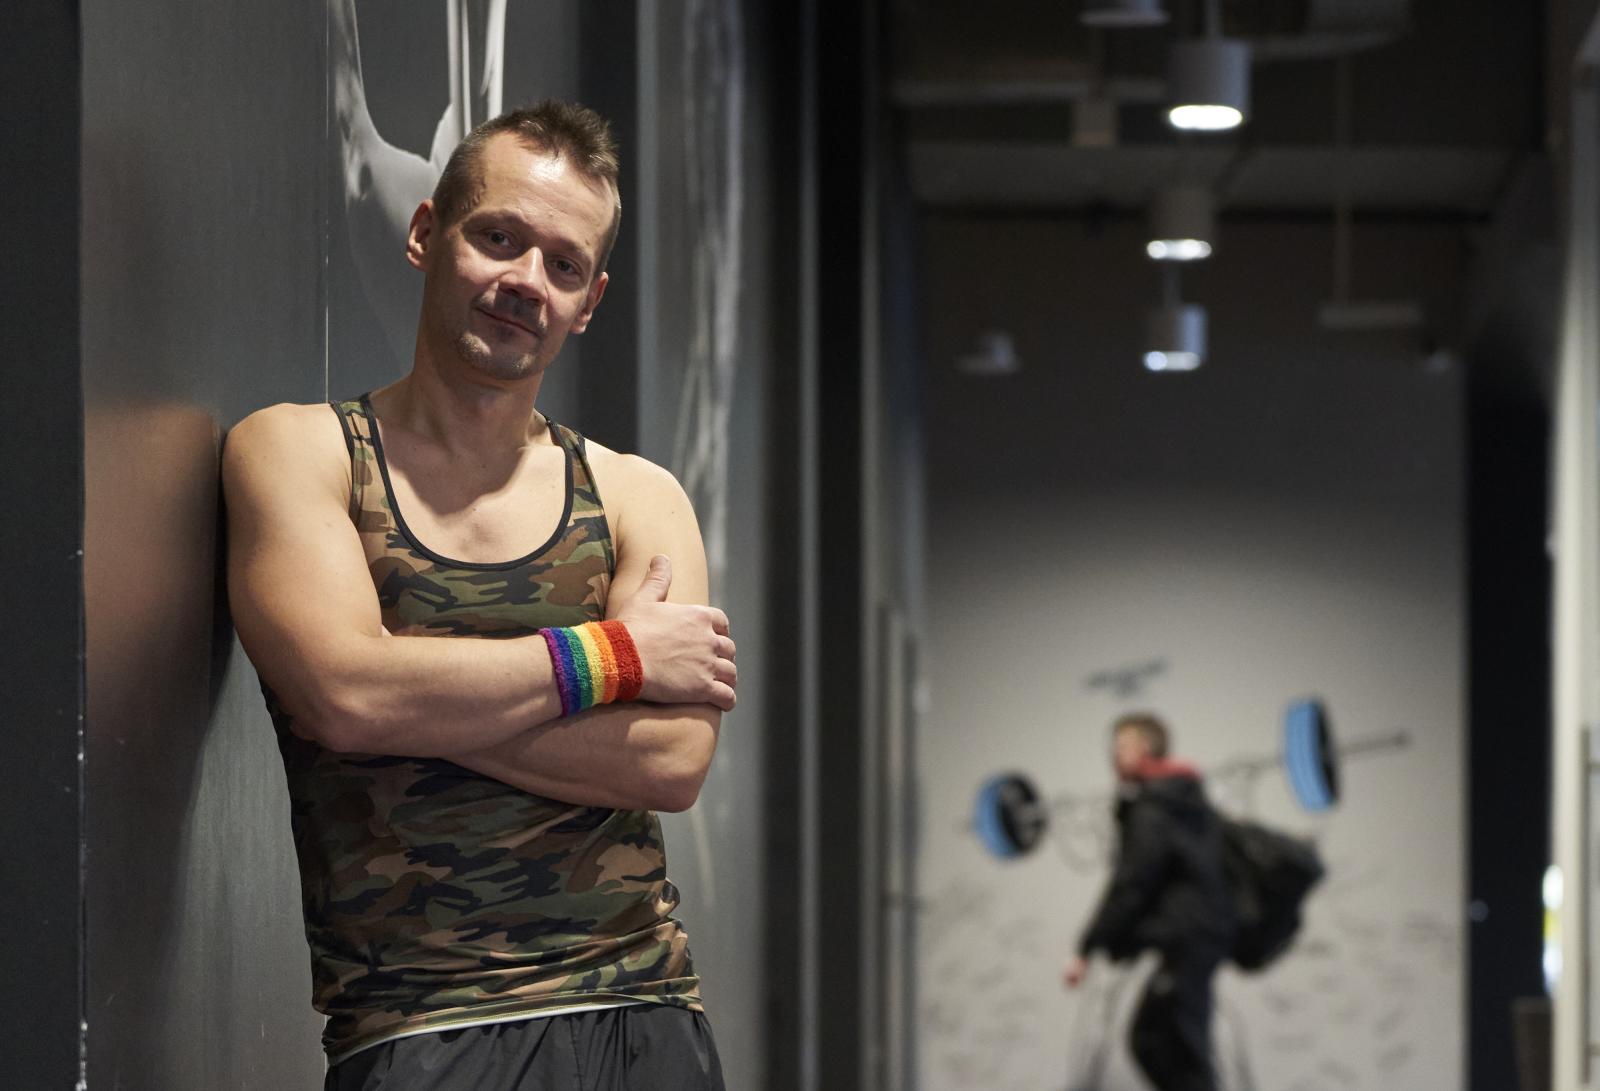 _Portraits - Andrzej, Ironman and leader of queer sports group...